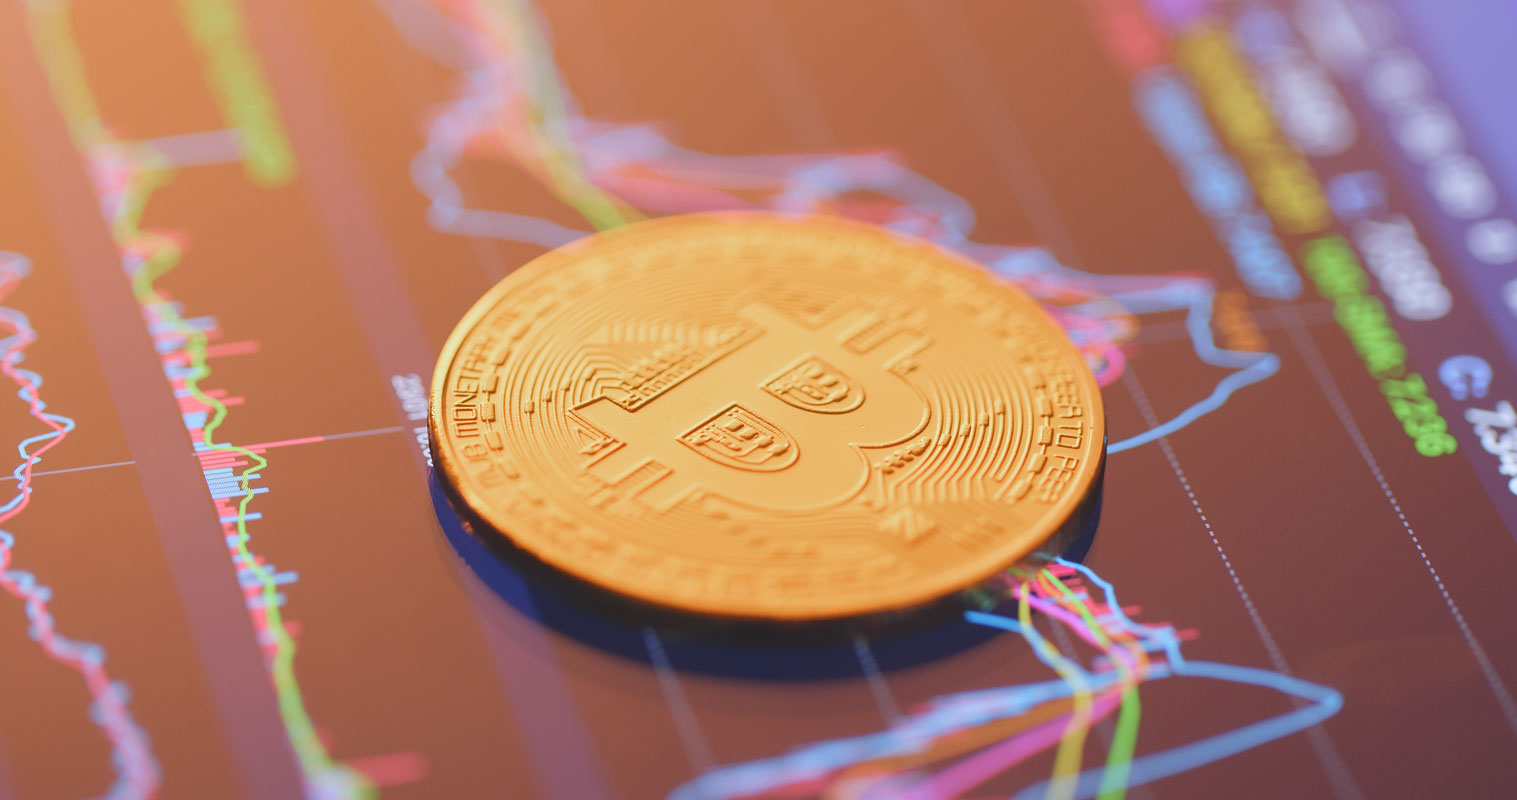 Coin representing bitcoin next to a graphic showing the cryptocurrency's price variation